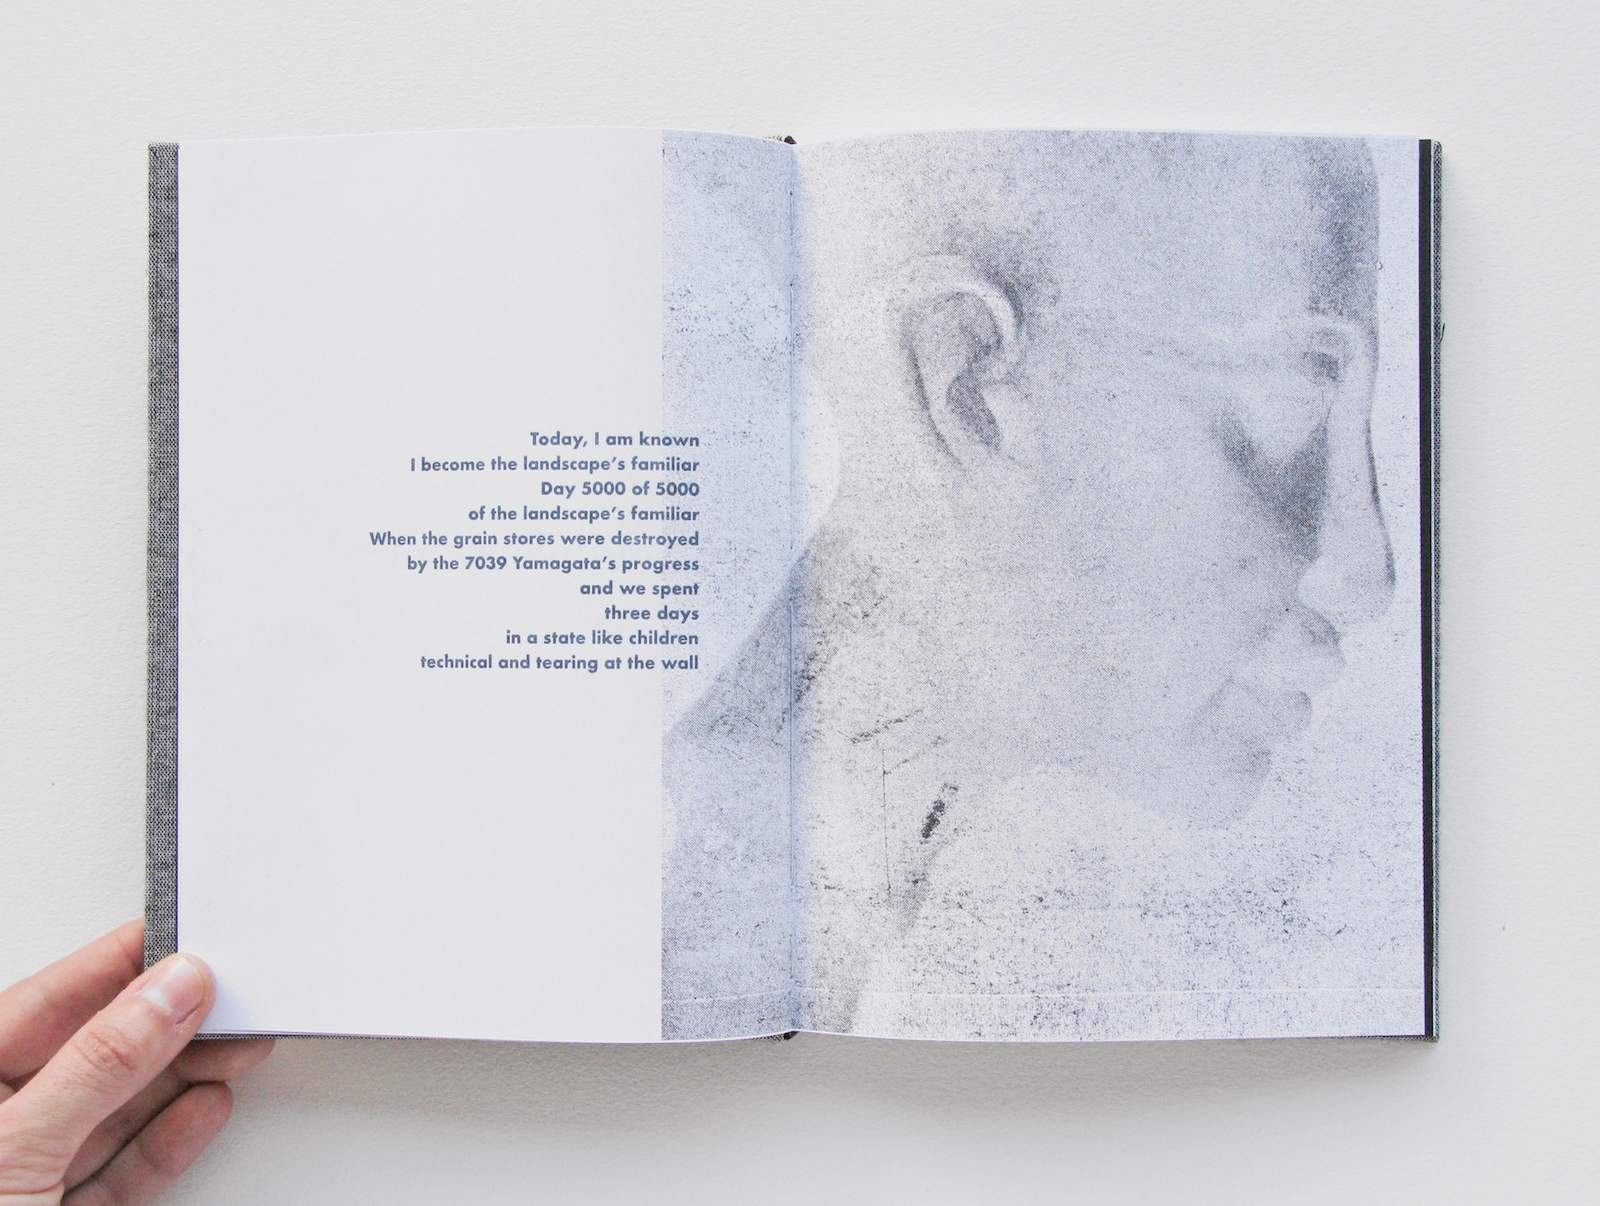 a person holds open a book with a ghostly image of a face on the right page and text on the left